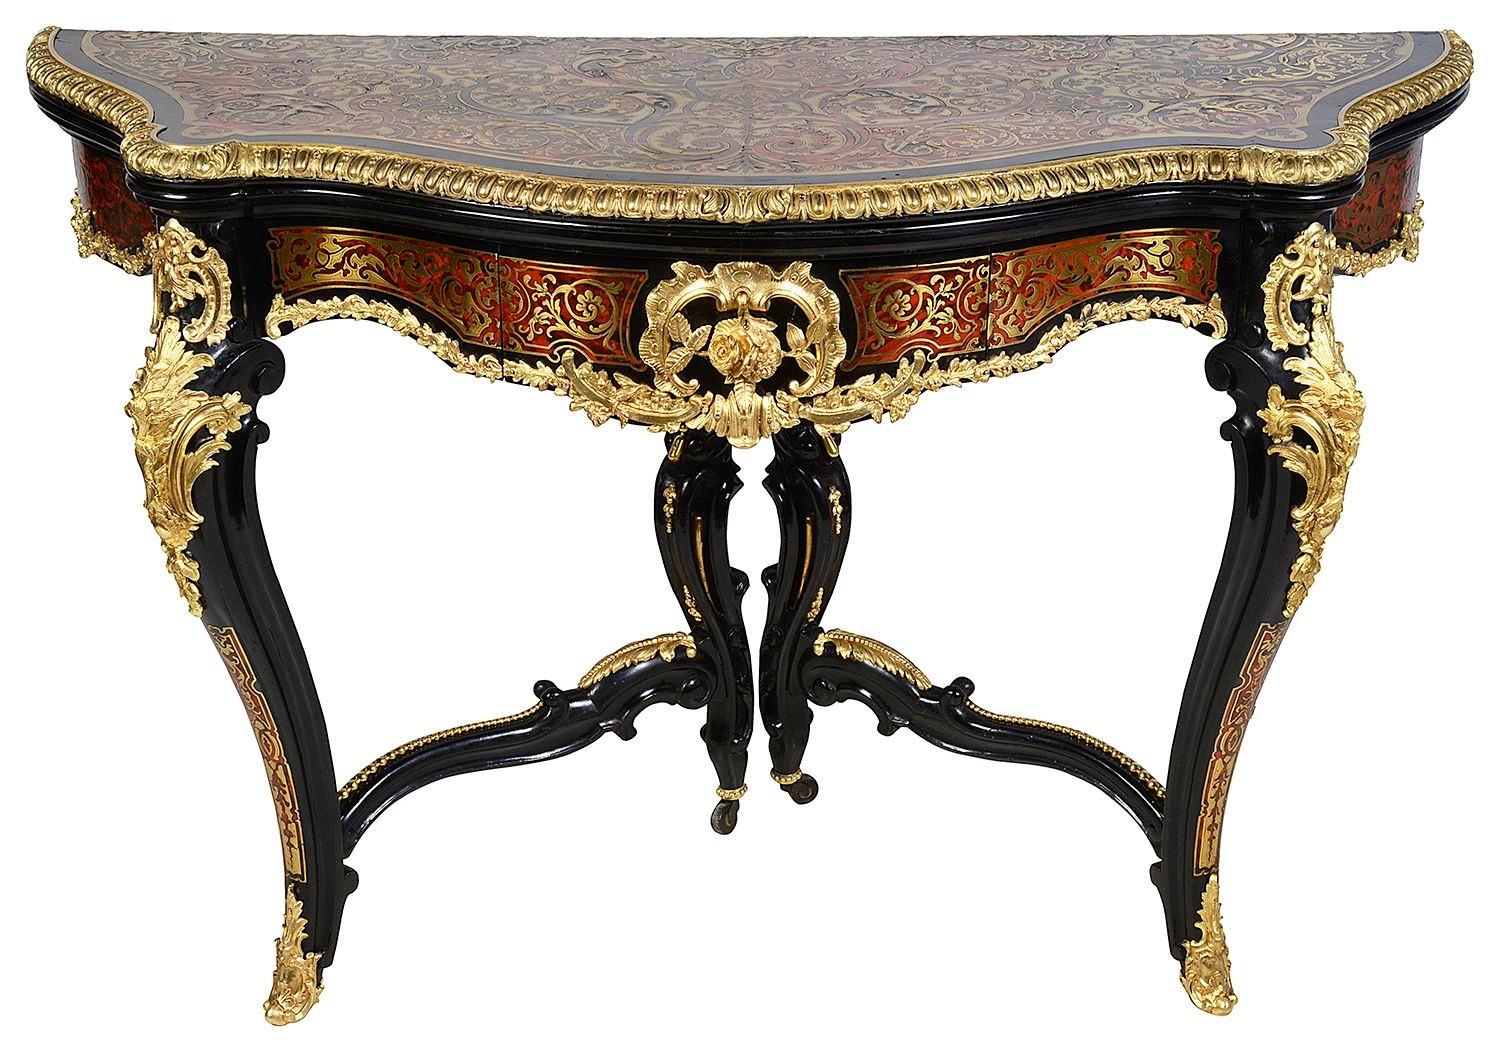 A rare pair of French 19th Century Boulle inlaid serpentine card tables. Each with wonderful red stained Tortoiseshell, inlaid classical decoration, gilded ormolu mounts and mouldings. The gate leg action supporting the open tops, revealing blue